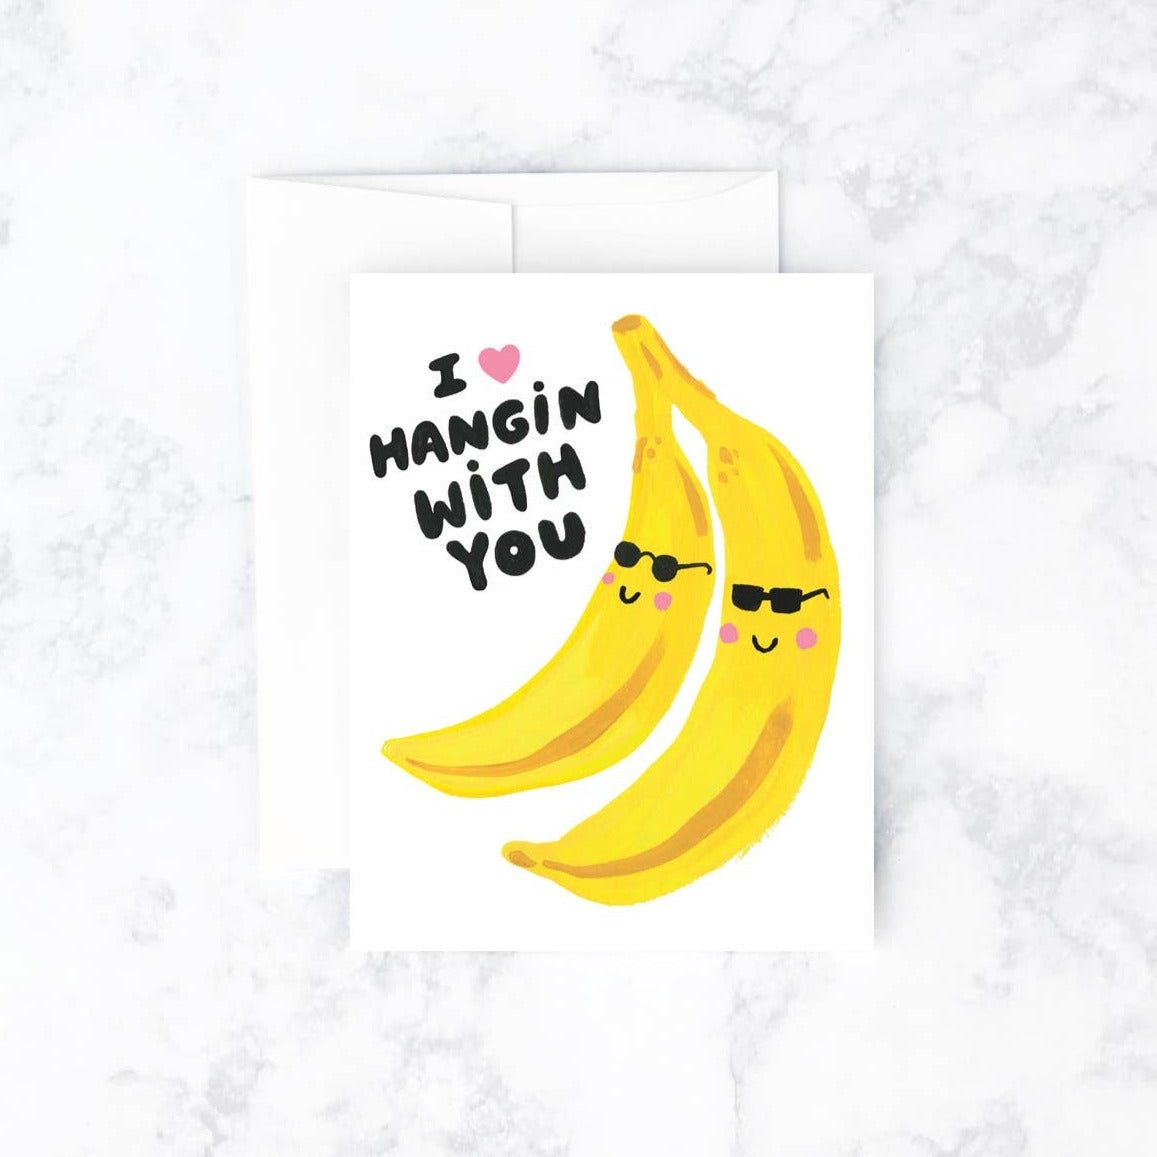 Greeting card reads "I <3 hangin with you" and has two bananas with sunglasses on 